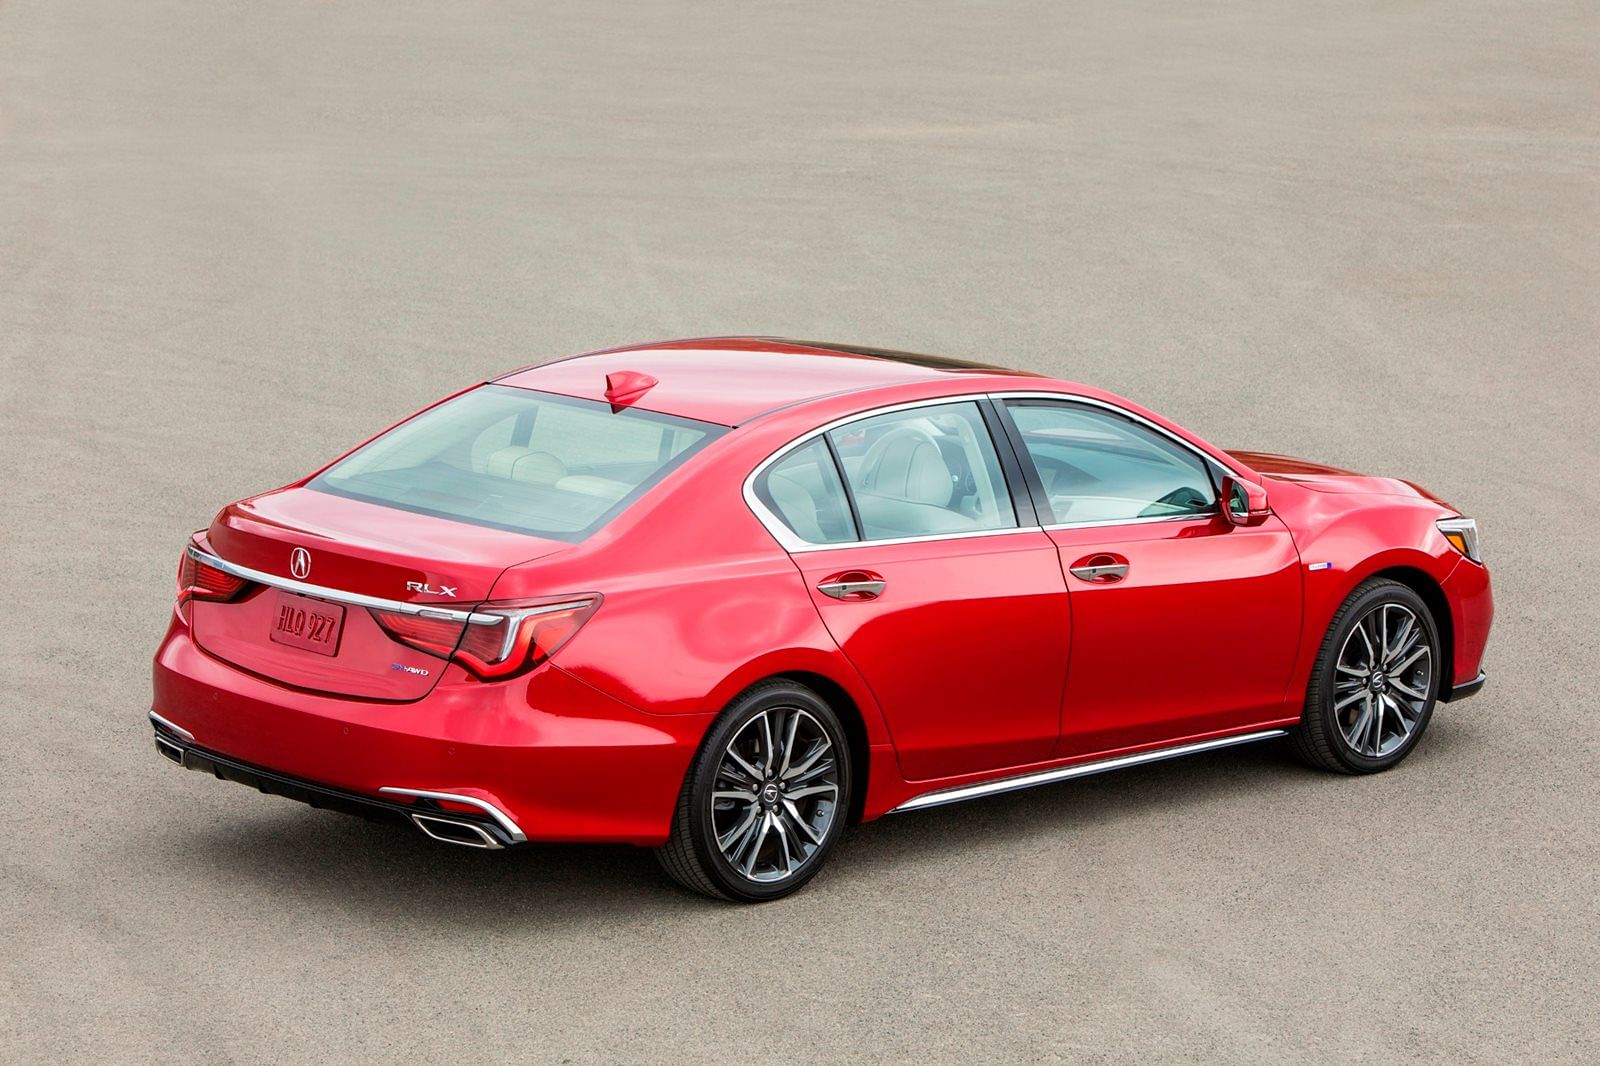 2020 Acura RLX hybrid Sedan Price, Review, Pictures and Ratings